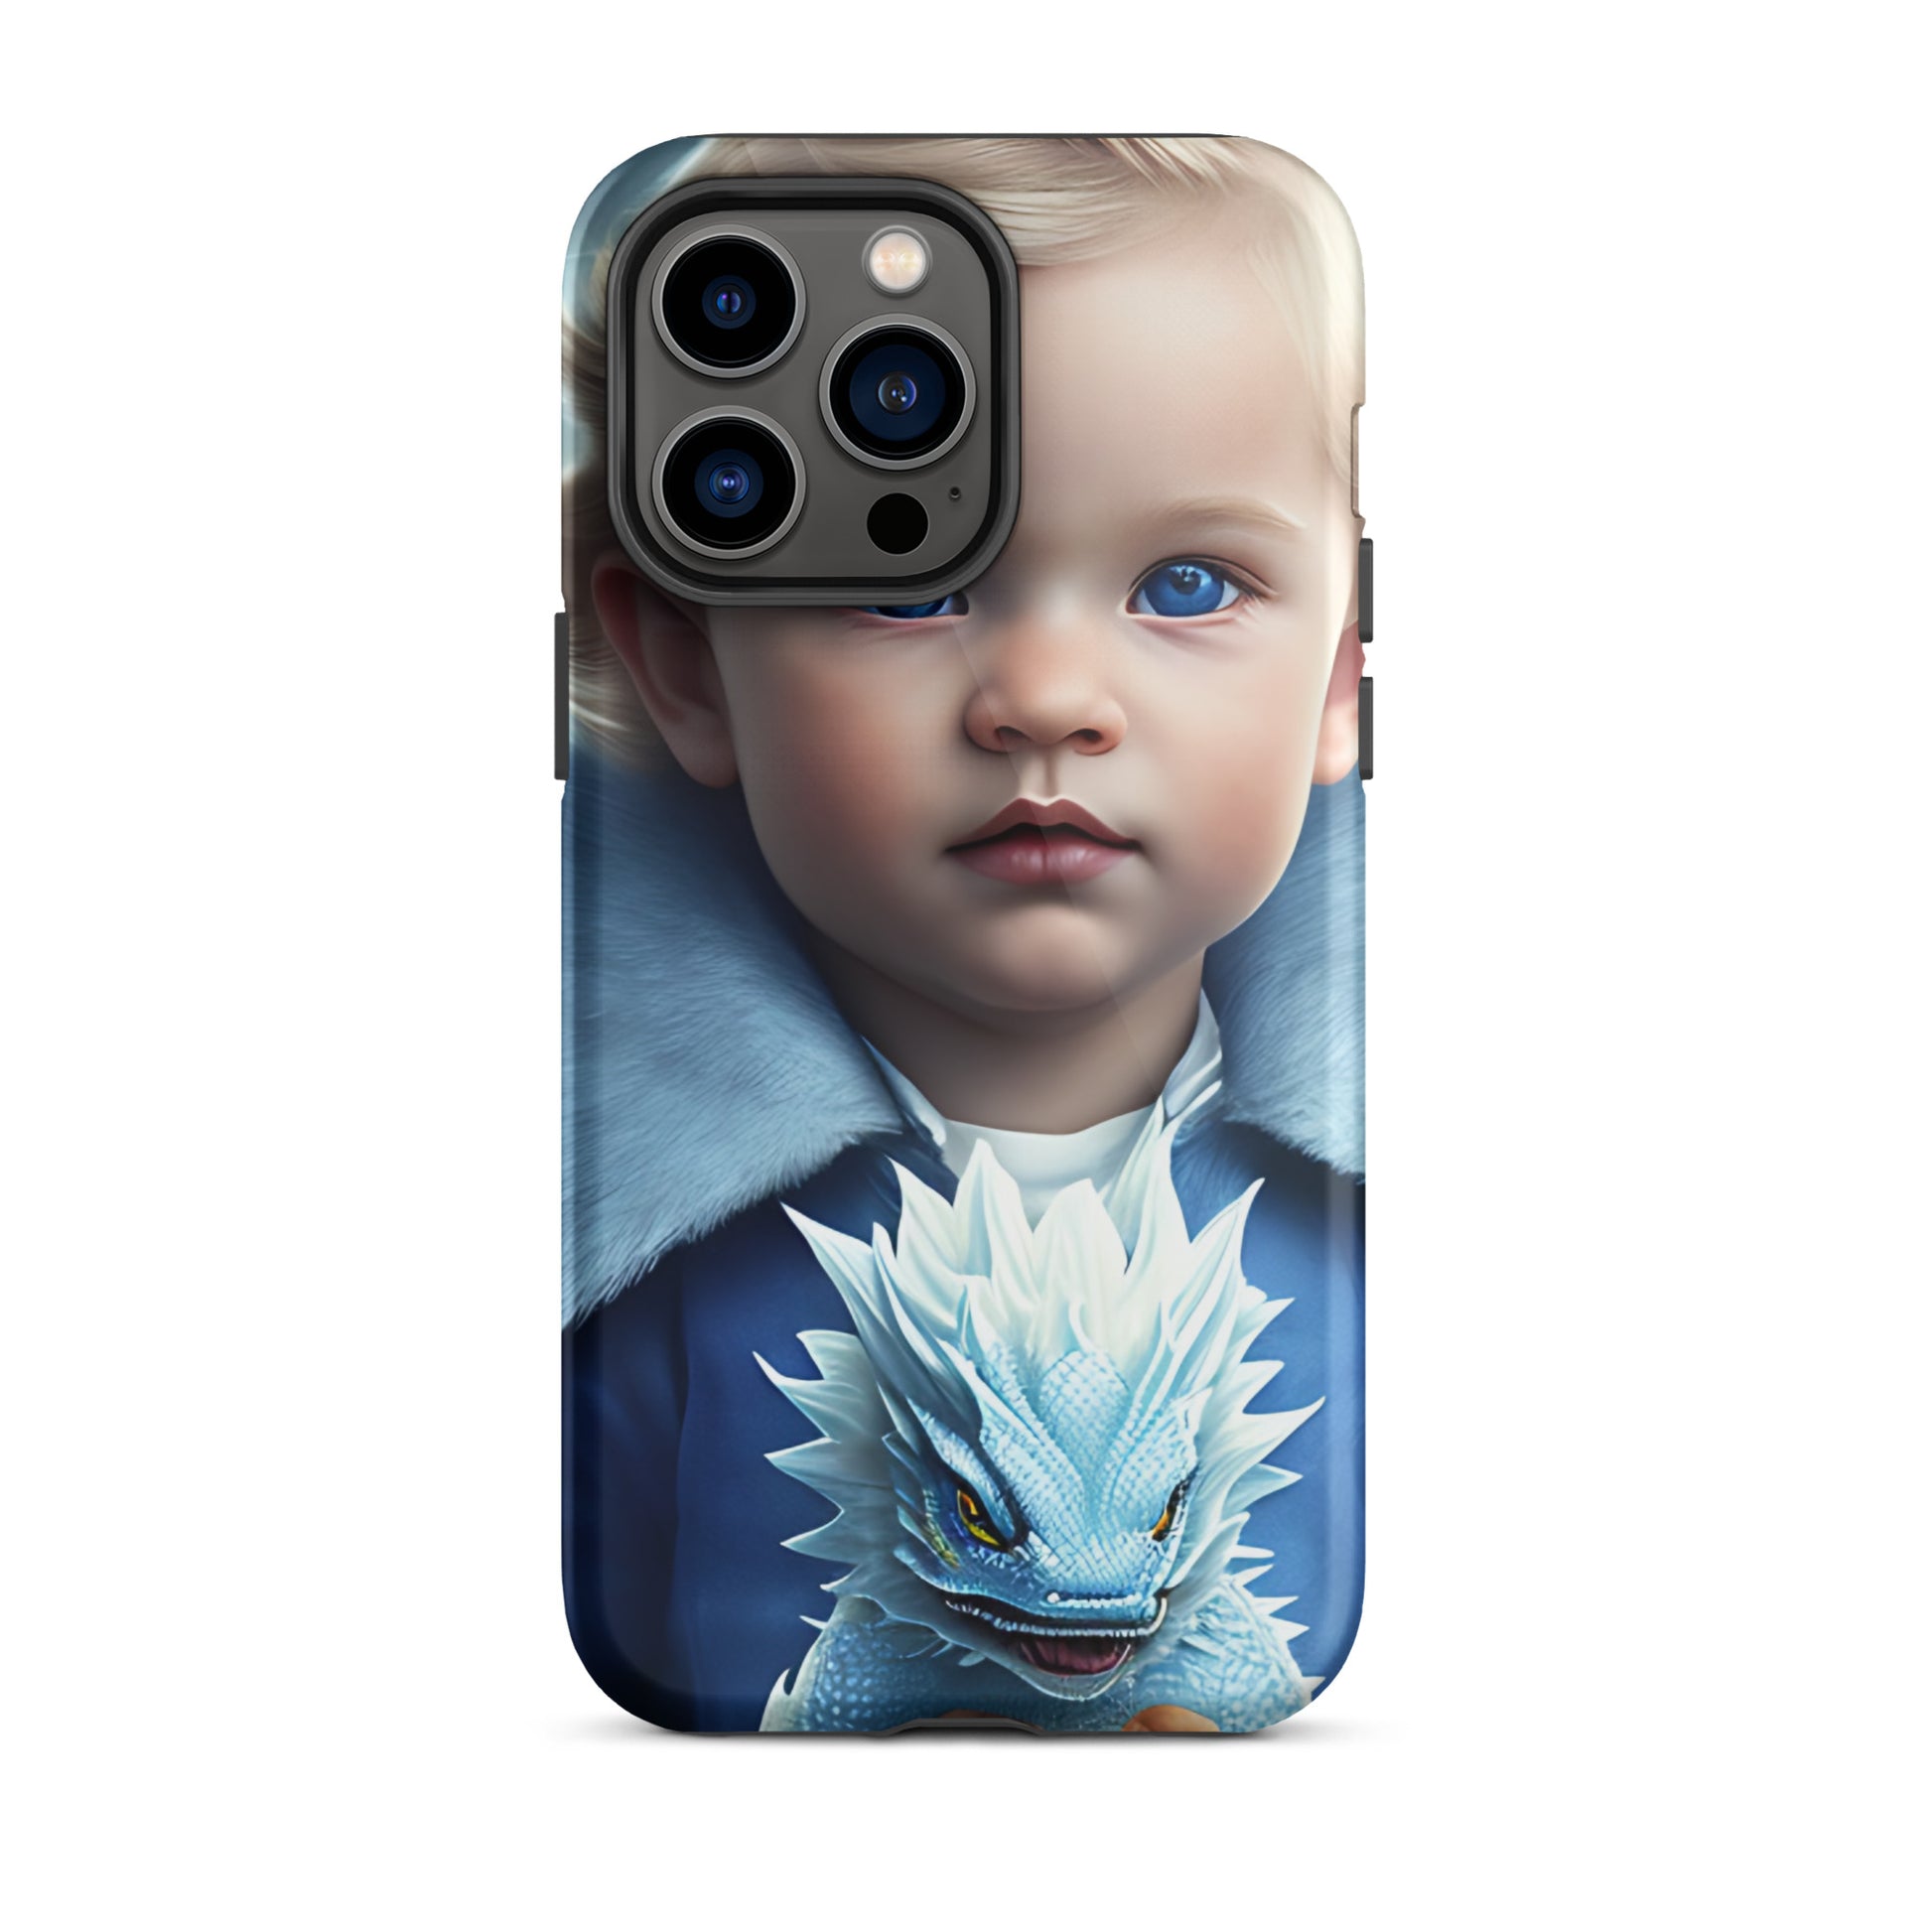 A picture of a an iphone case with a blond haired blue eyed boy, blue top holding a baby ice dragon in front - Dragon Prince #2 tough iphone case - glossy-iphone-14-pro-max-front